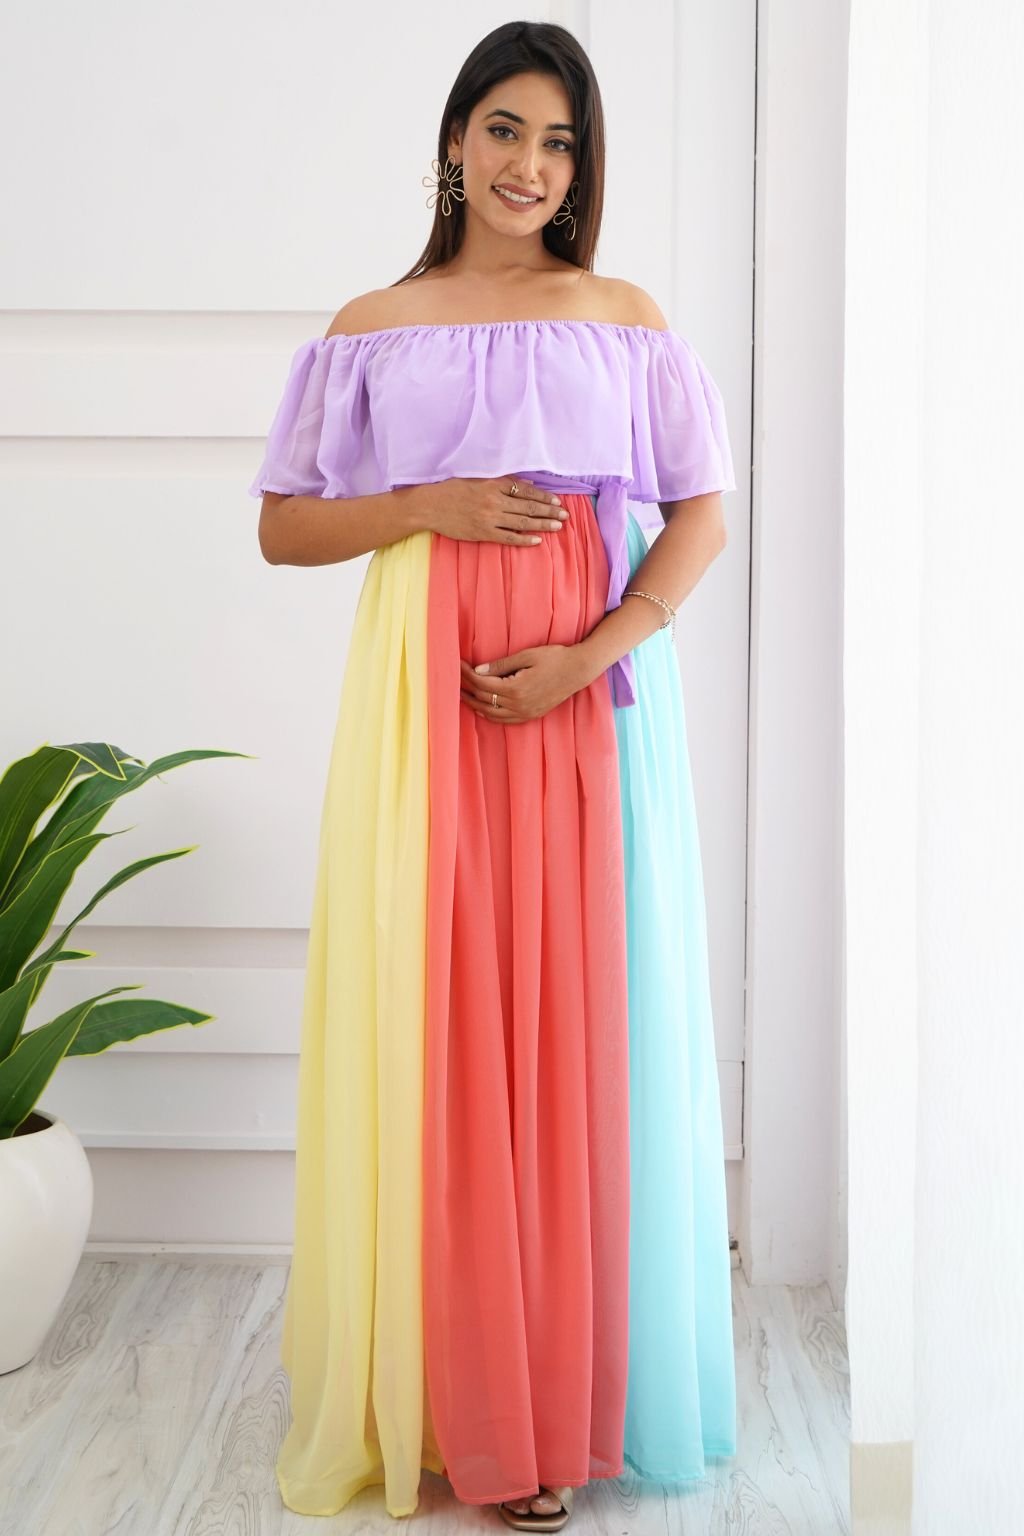 Baby Shower Dresses: What to Wear to Your Baby Shower - Leisurely Linds